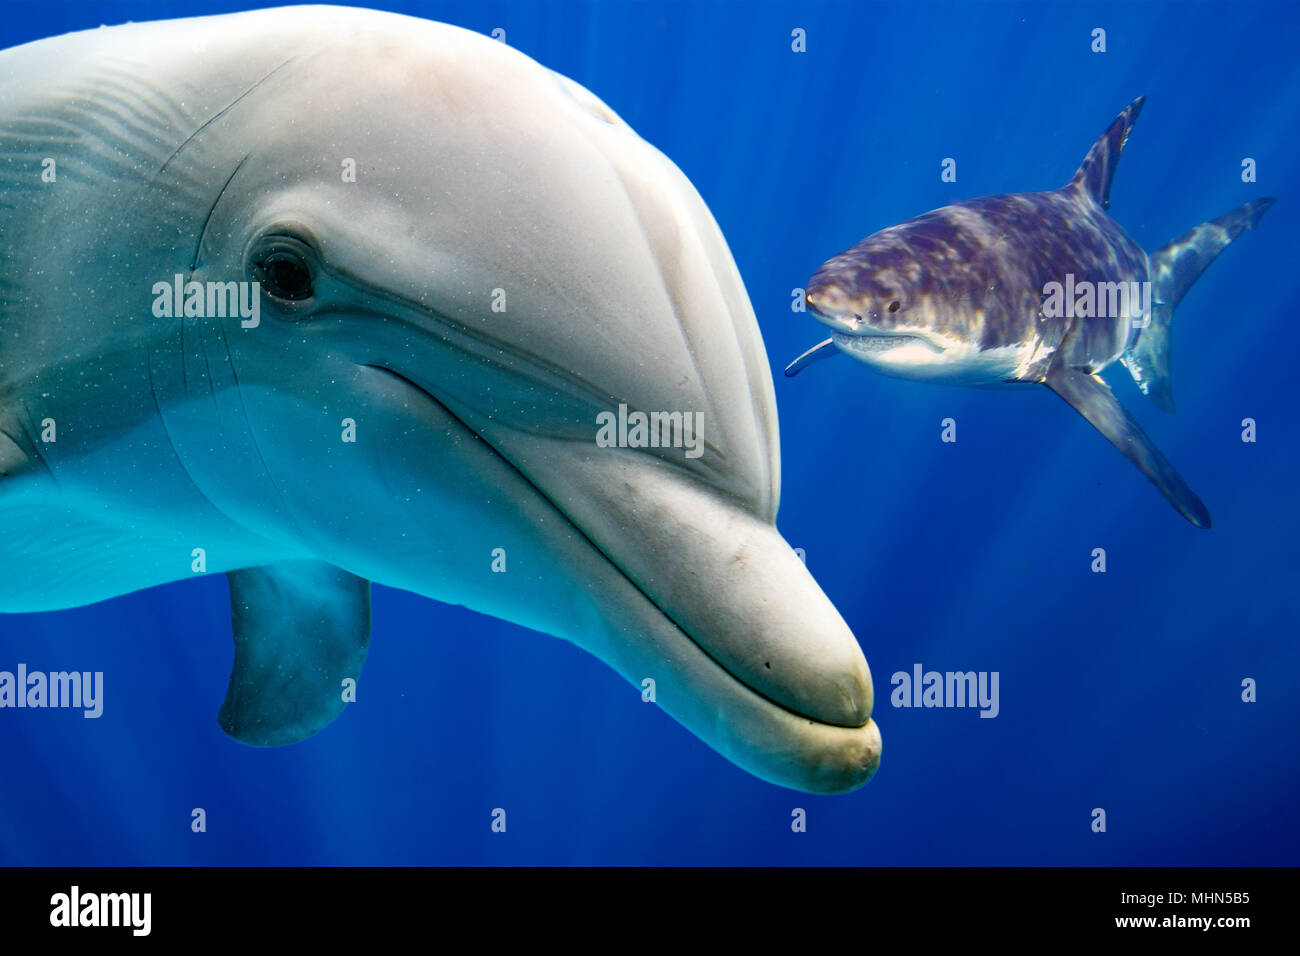 dolphin underwater great white shark attack on ocean background looking at you Stock Photo